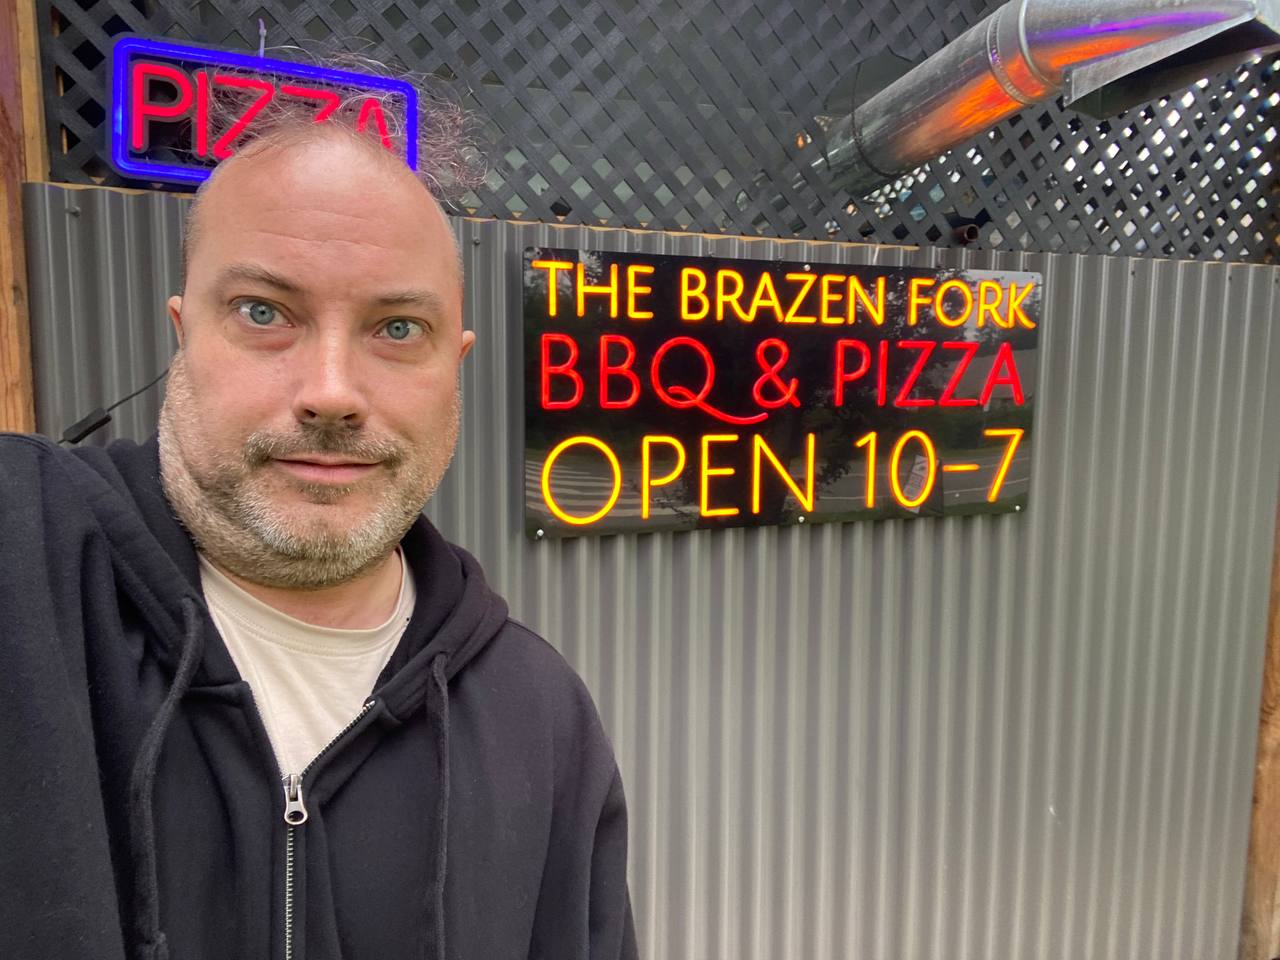 Selfie with The Brazen Fork sign.